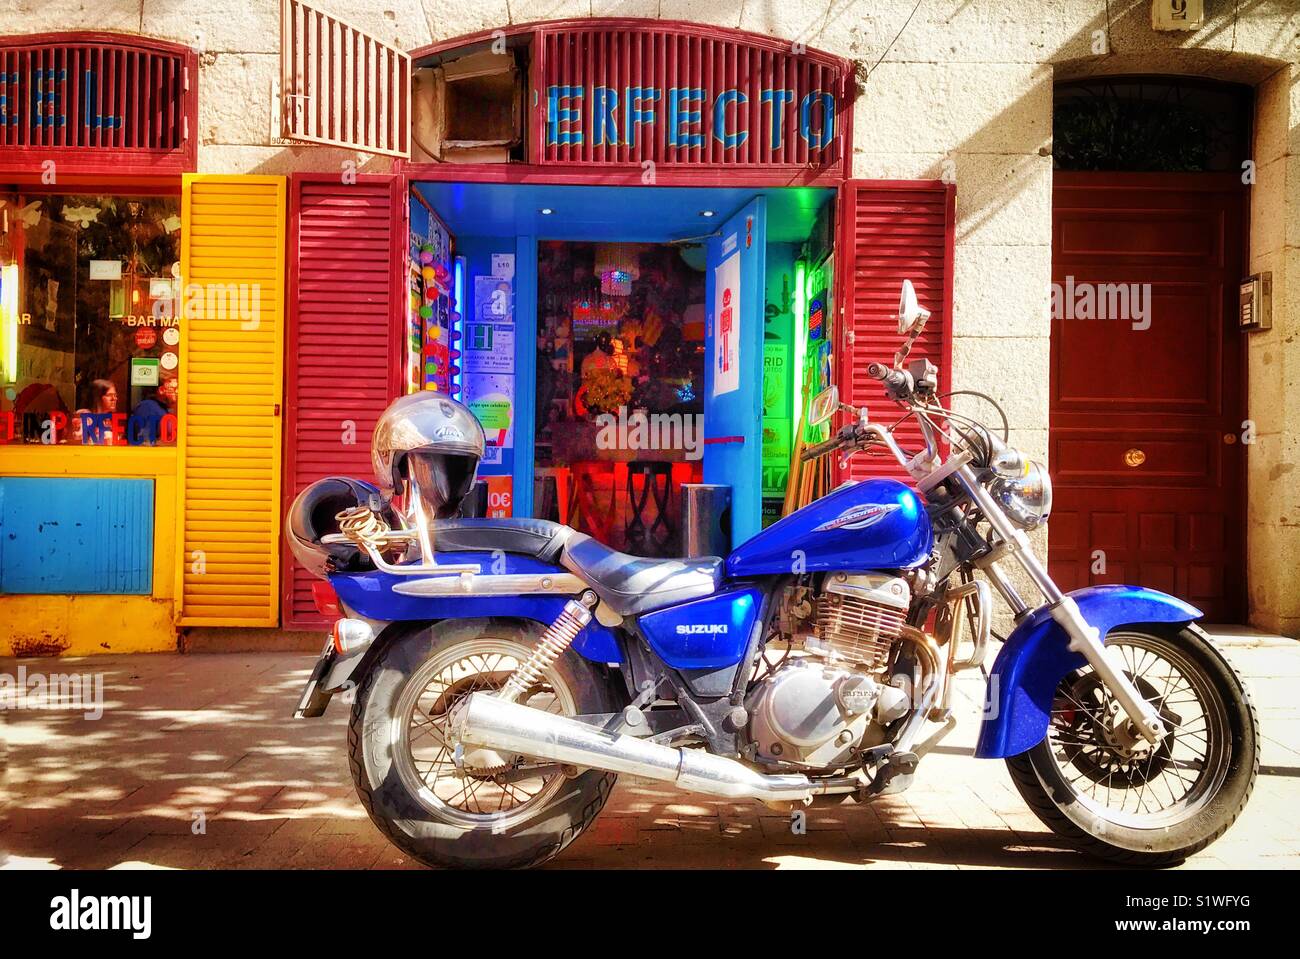 A blue and chrome Japanese Suzuki motorbike parked on the pavement in front of a colourful shop entrance in Madrid, Spain Stock Photo